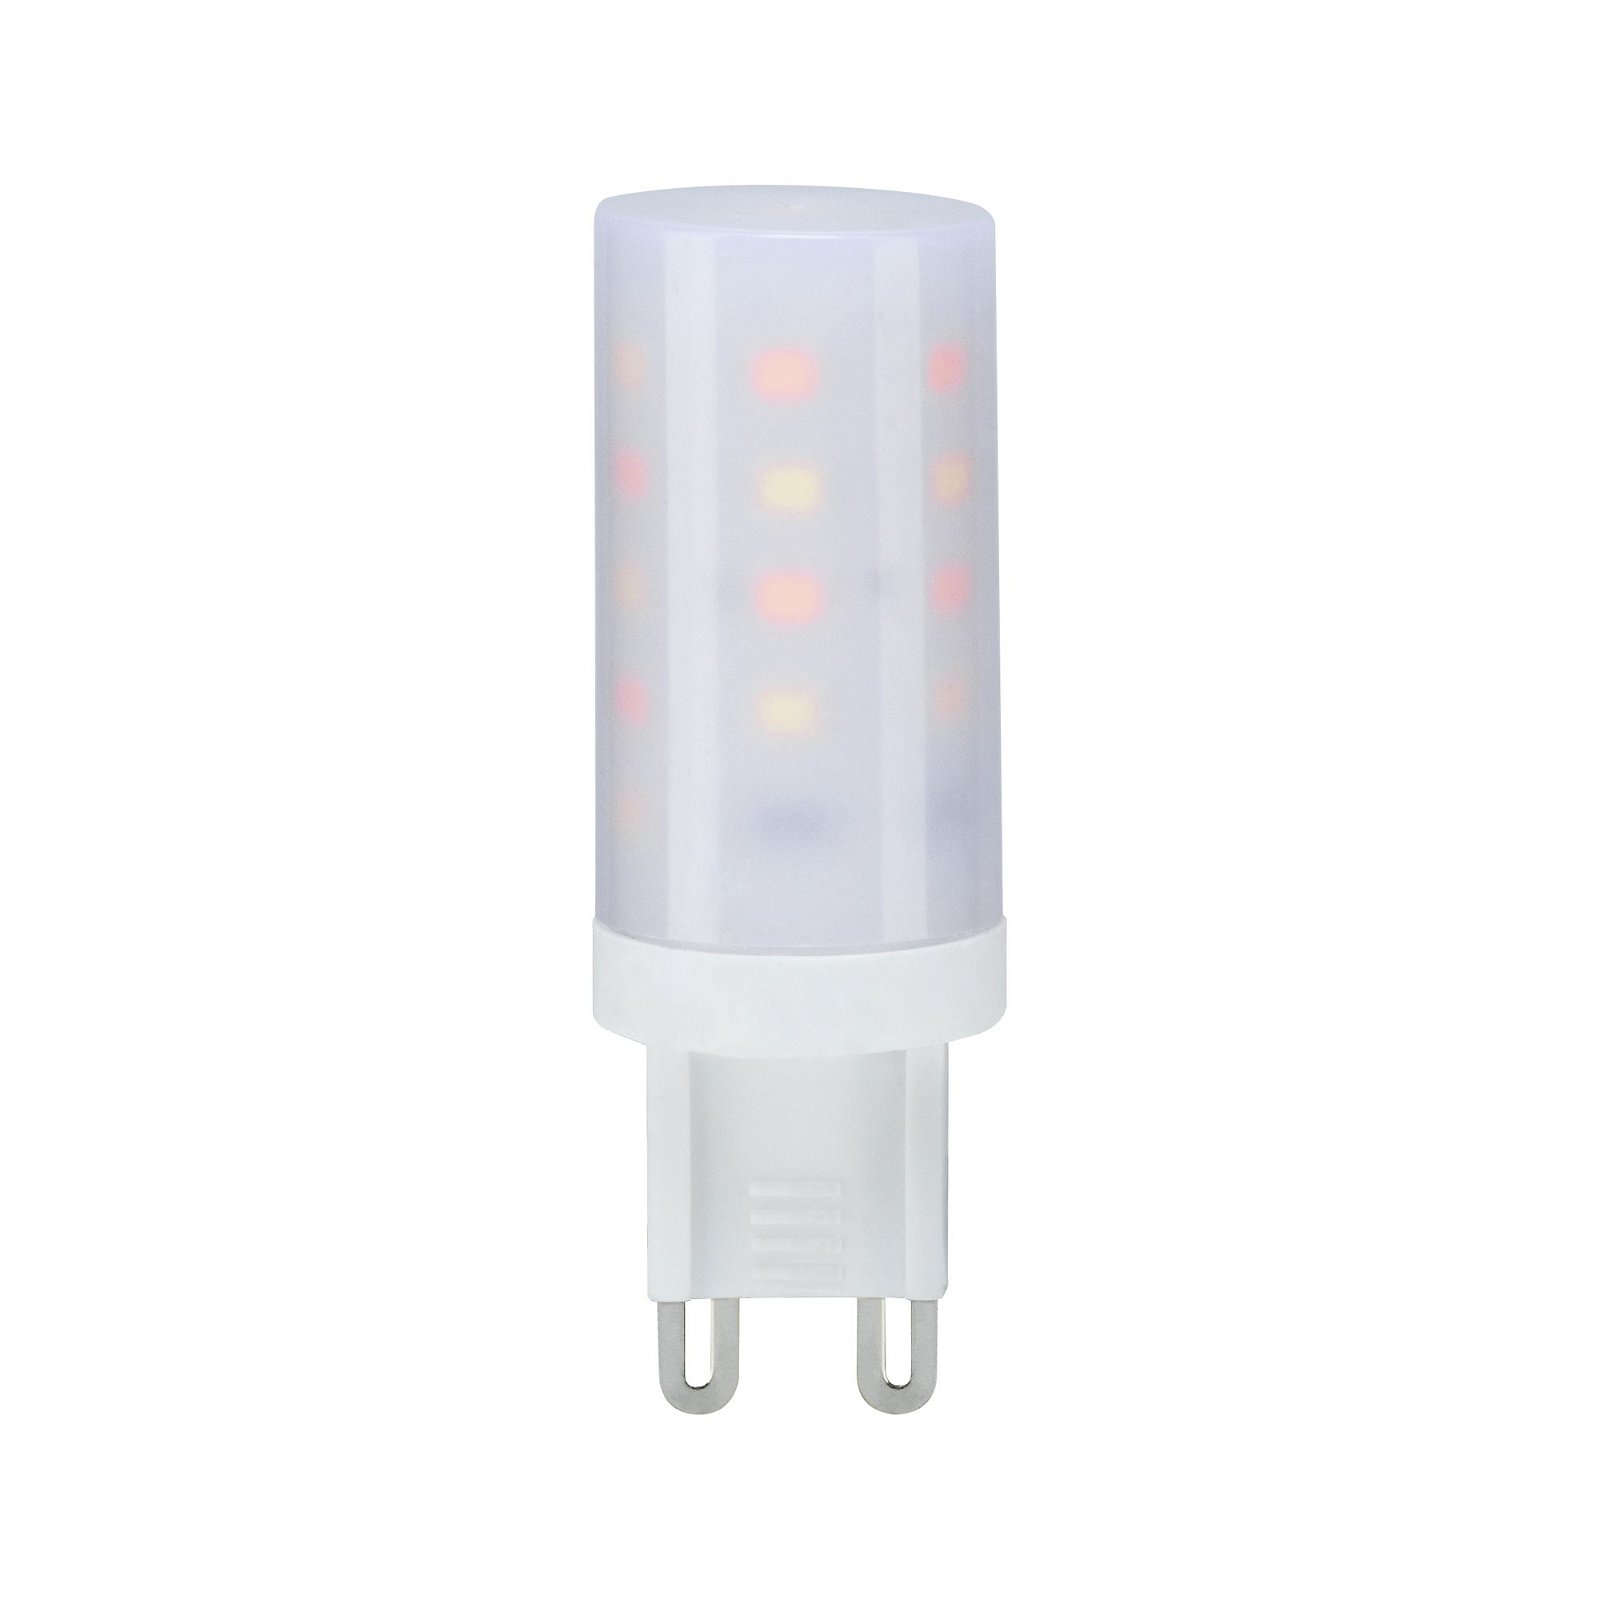 230 V Standard LED Pin base G9 1 pack 300lm 4W Tunable White dimmable Clear